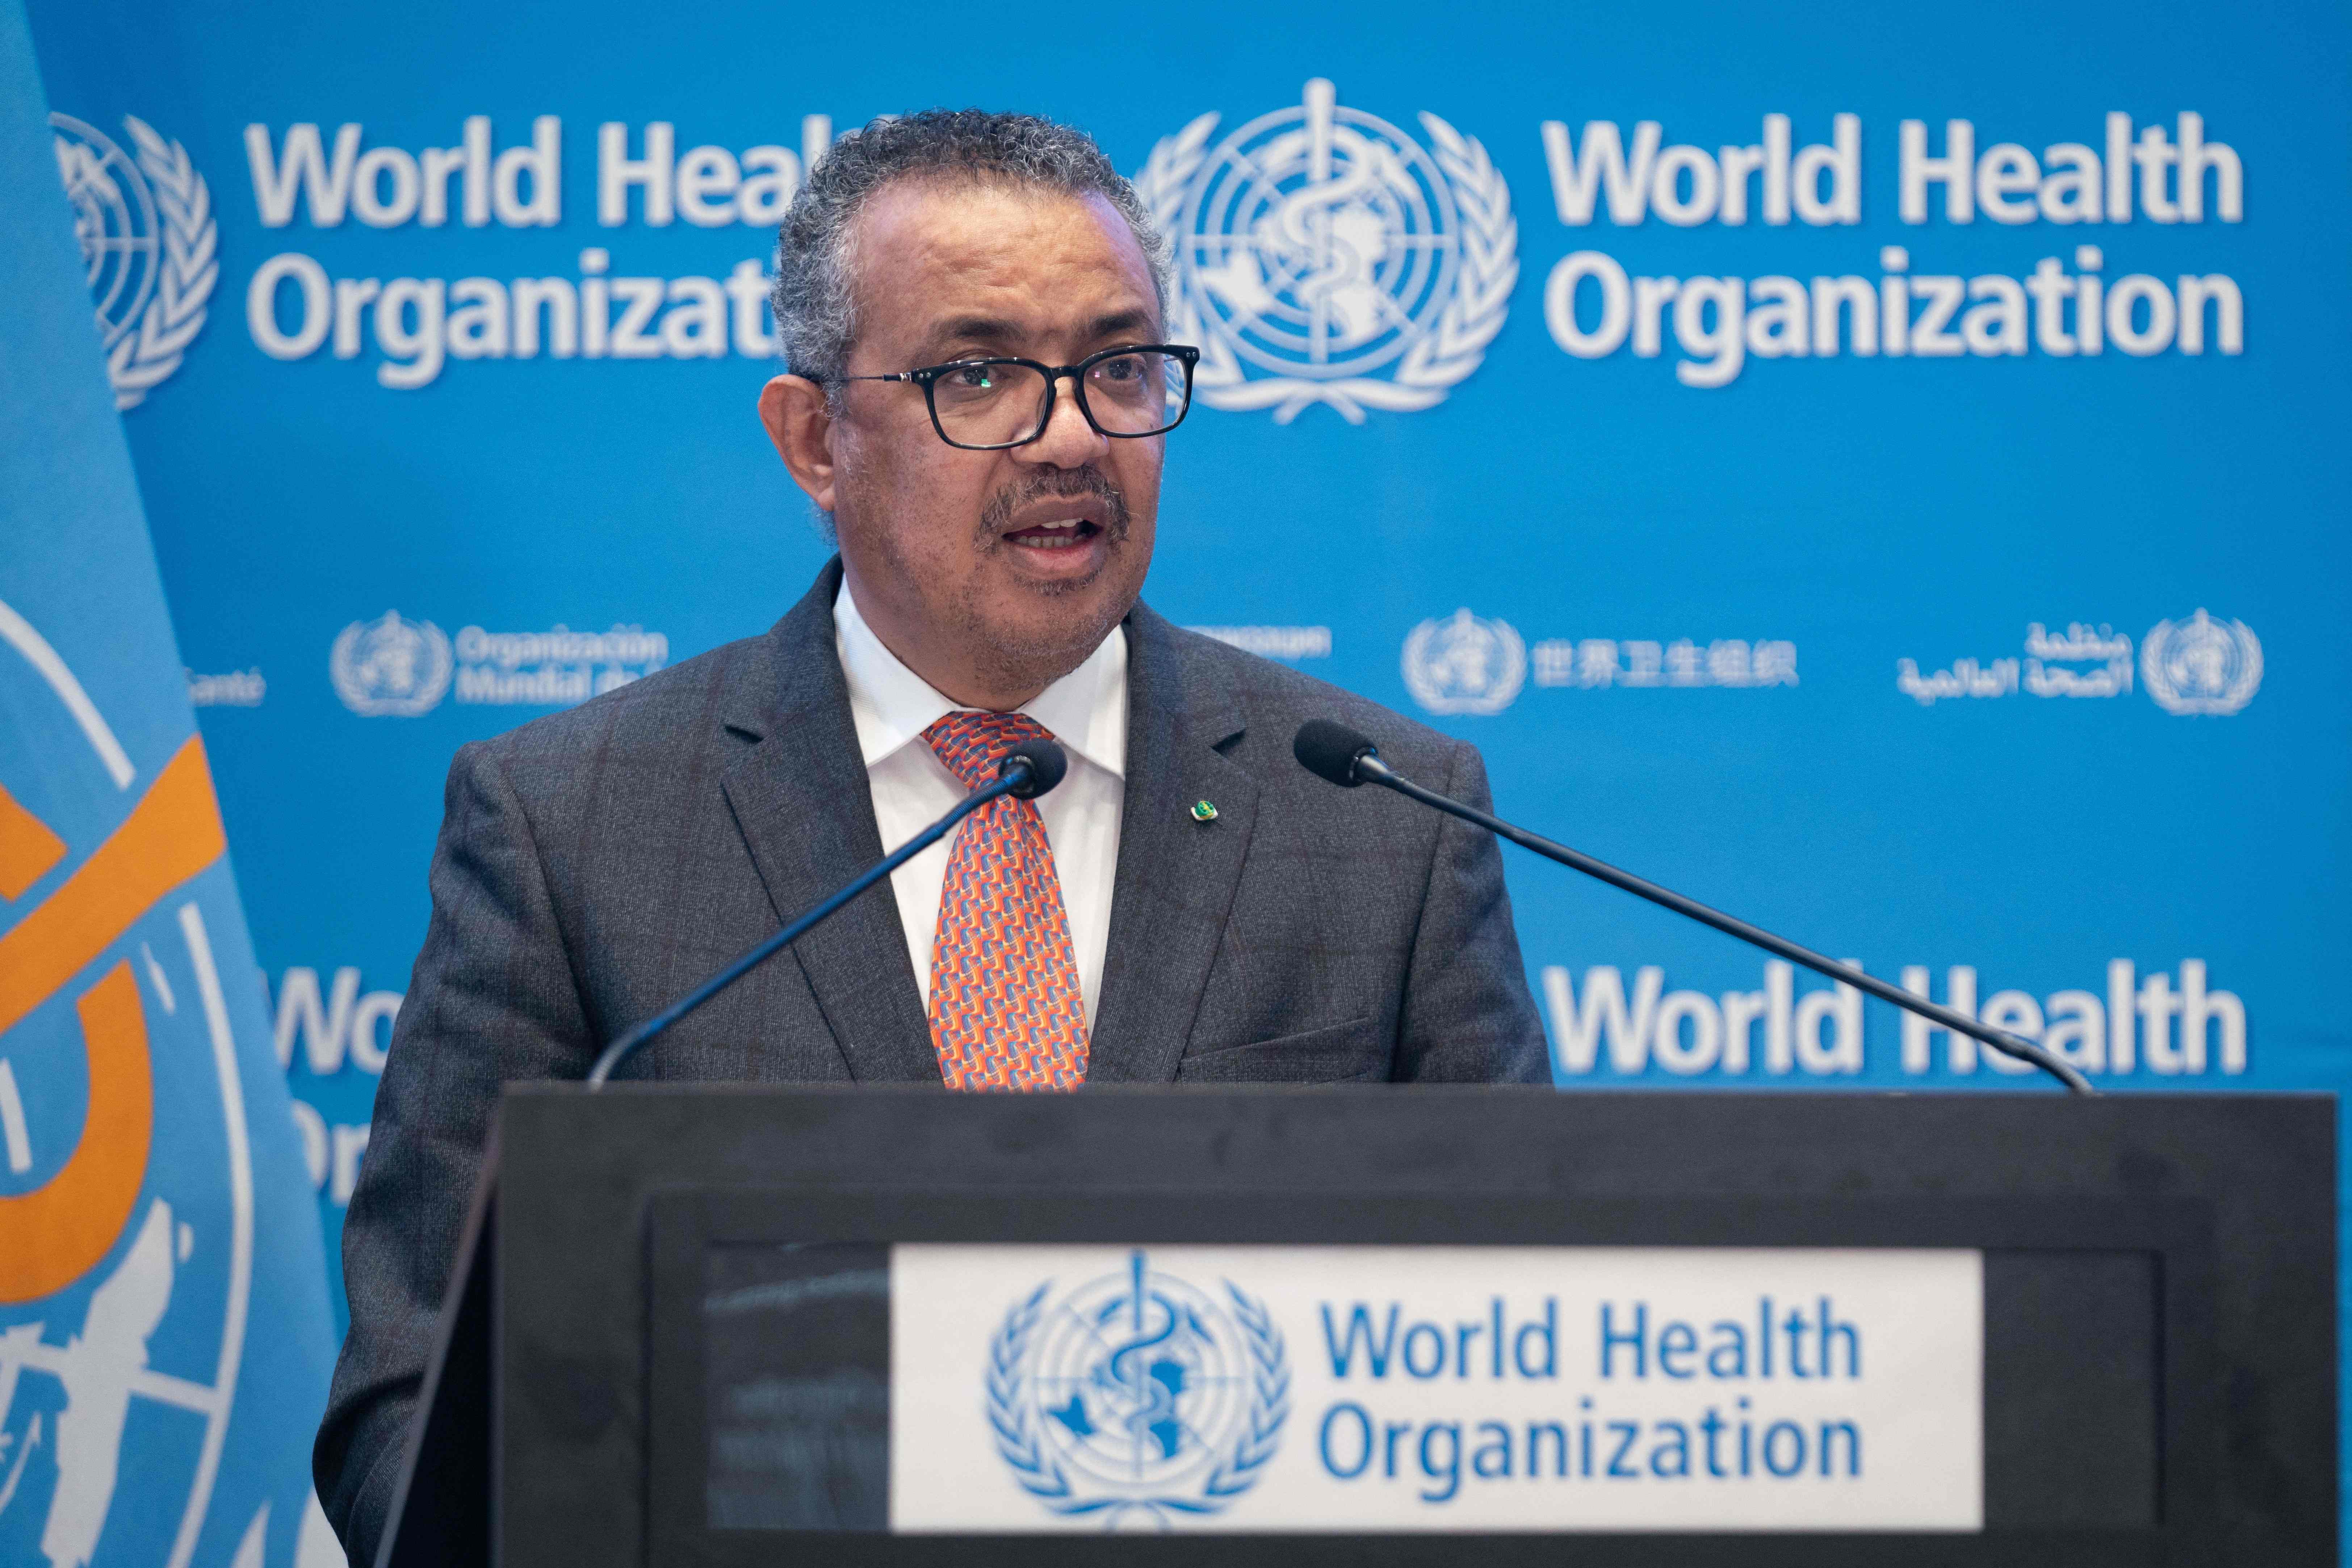 WHO director-general Tedros Adhanom Ghebreyesus issued a stark warning about the new omicron variant